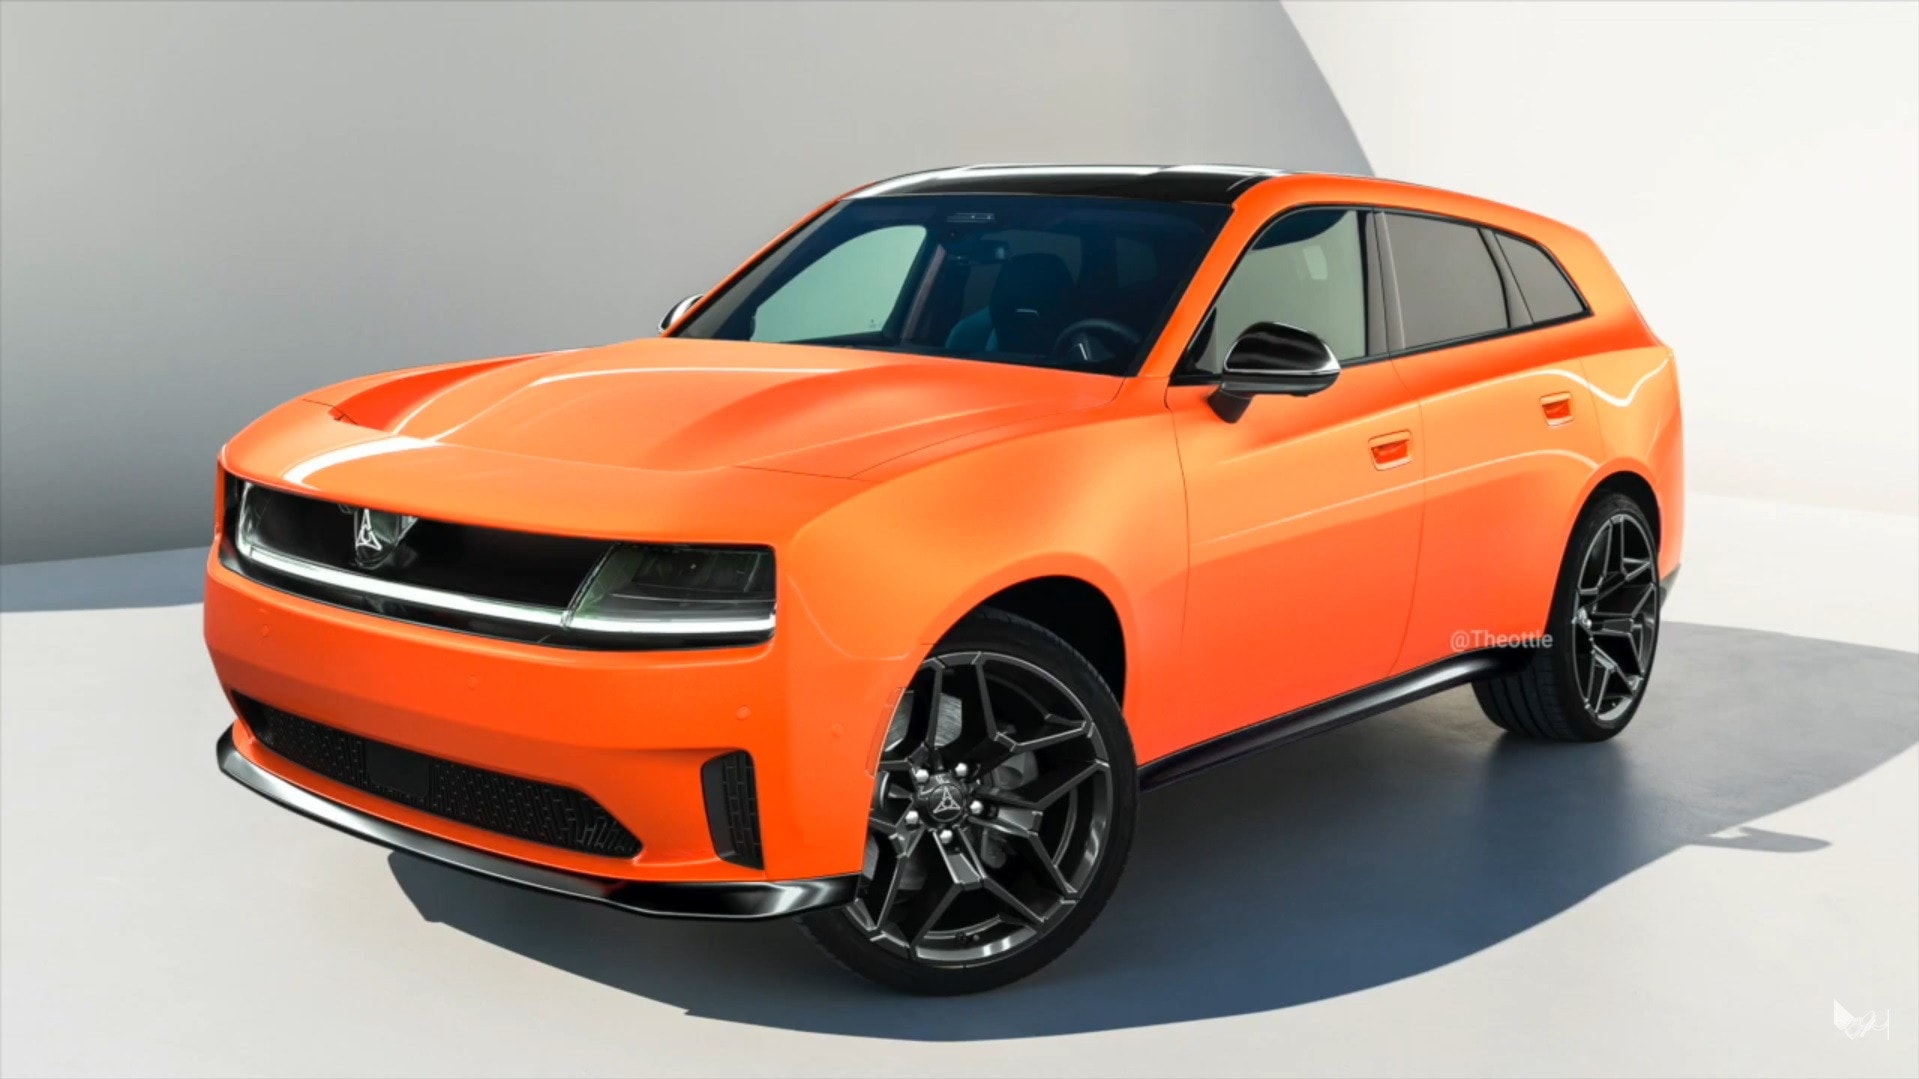 Dodge's Electric Muscle Charger and Durango's Future Ahead DAX Street